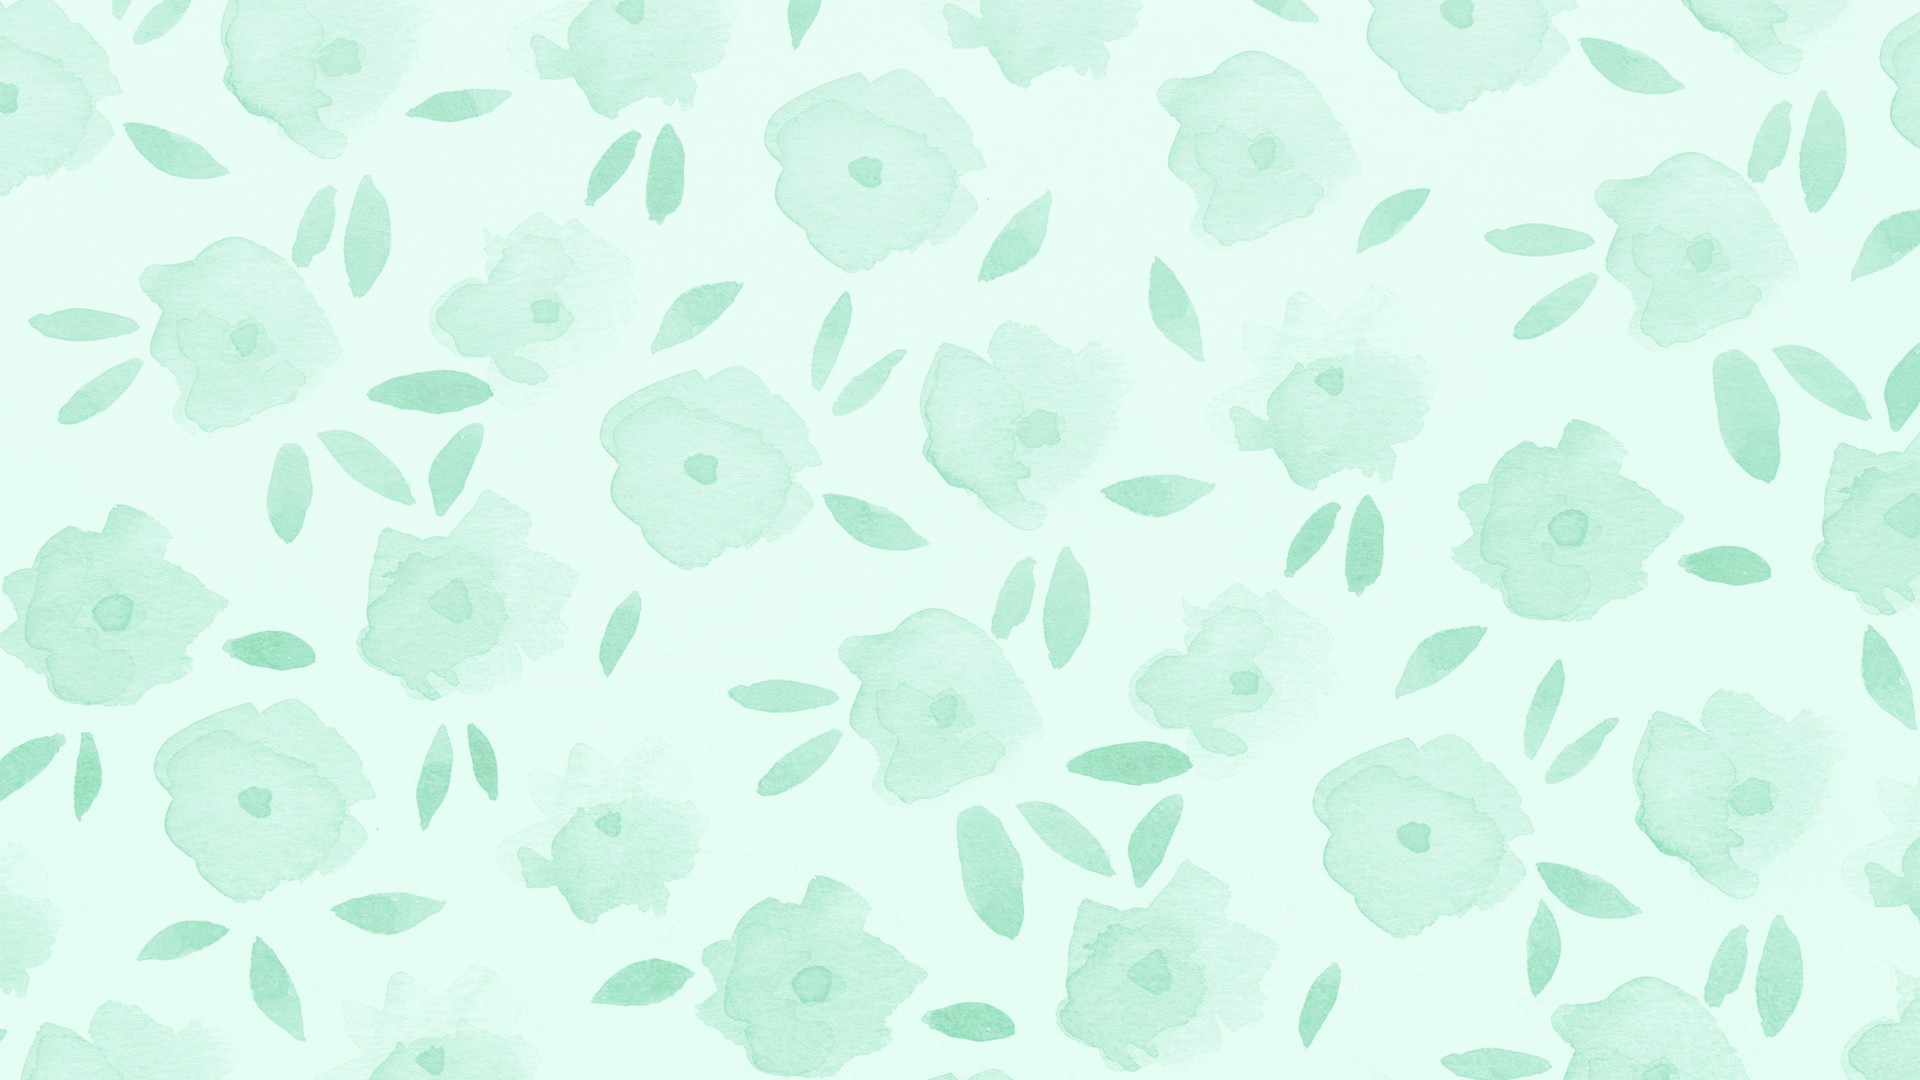 Start Download Mint Green Wallpaper For Laptop 942651 Hd Wallpaper Backgrounds Download If you have an office job, you probably have a nice, neat desk, which has started to feel. start download mint green wallpaper